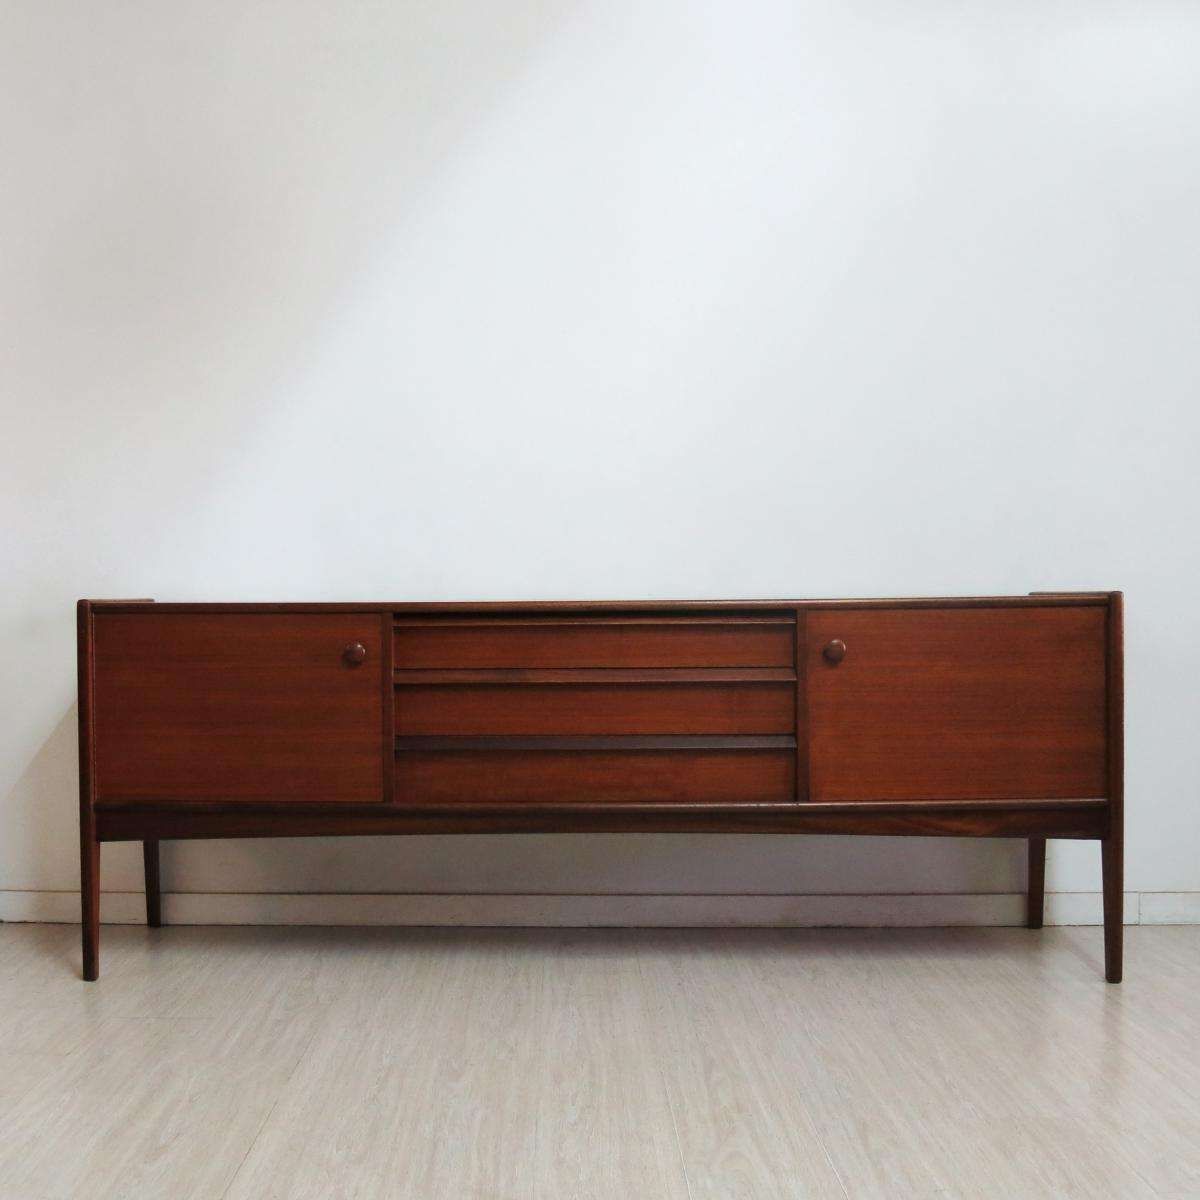 Vintage British Silva Sideboardjohn Herbert For Younger, 1960s Inside A Younger Sideboards (View 13 of 20)